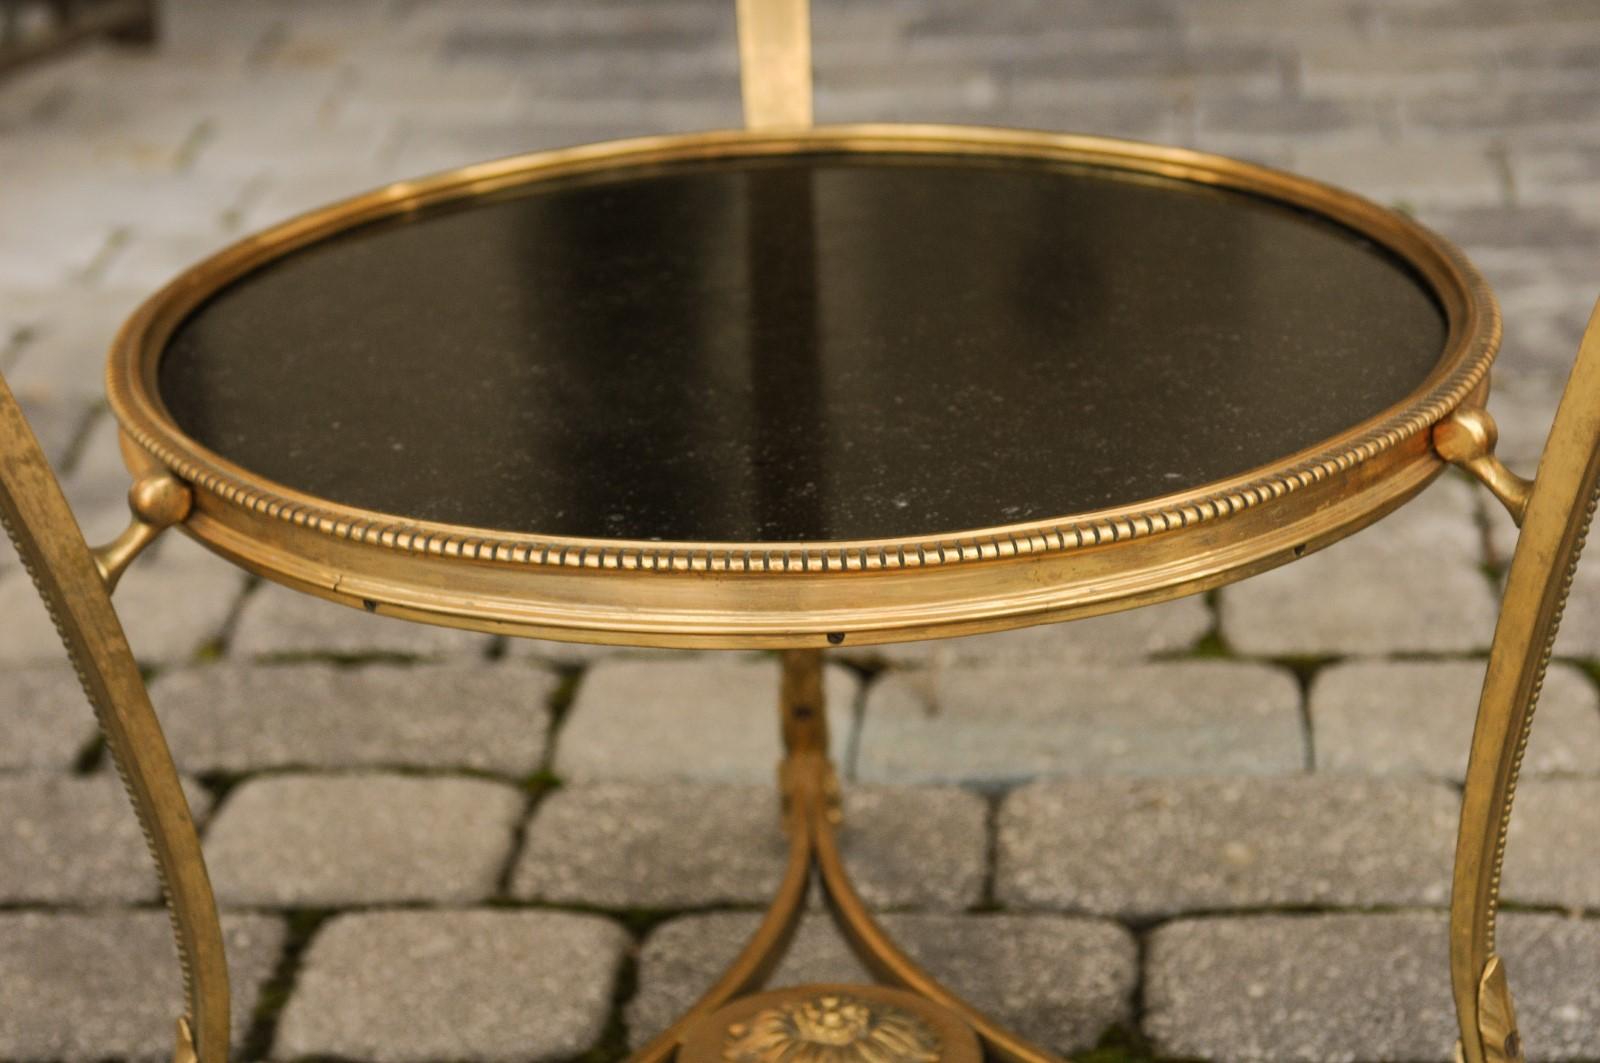 A French Directoire style gilt bronze guéridon table from the early 20th century, with black marble top and lower shelf, ram's heads, hoofed feet and beaded motifs. Born in France during the Roaring Twenties, this superb guéridon table features a